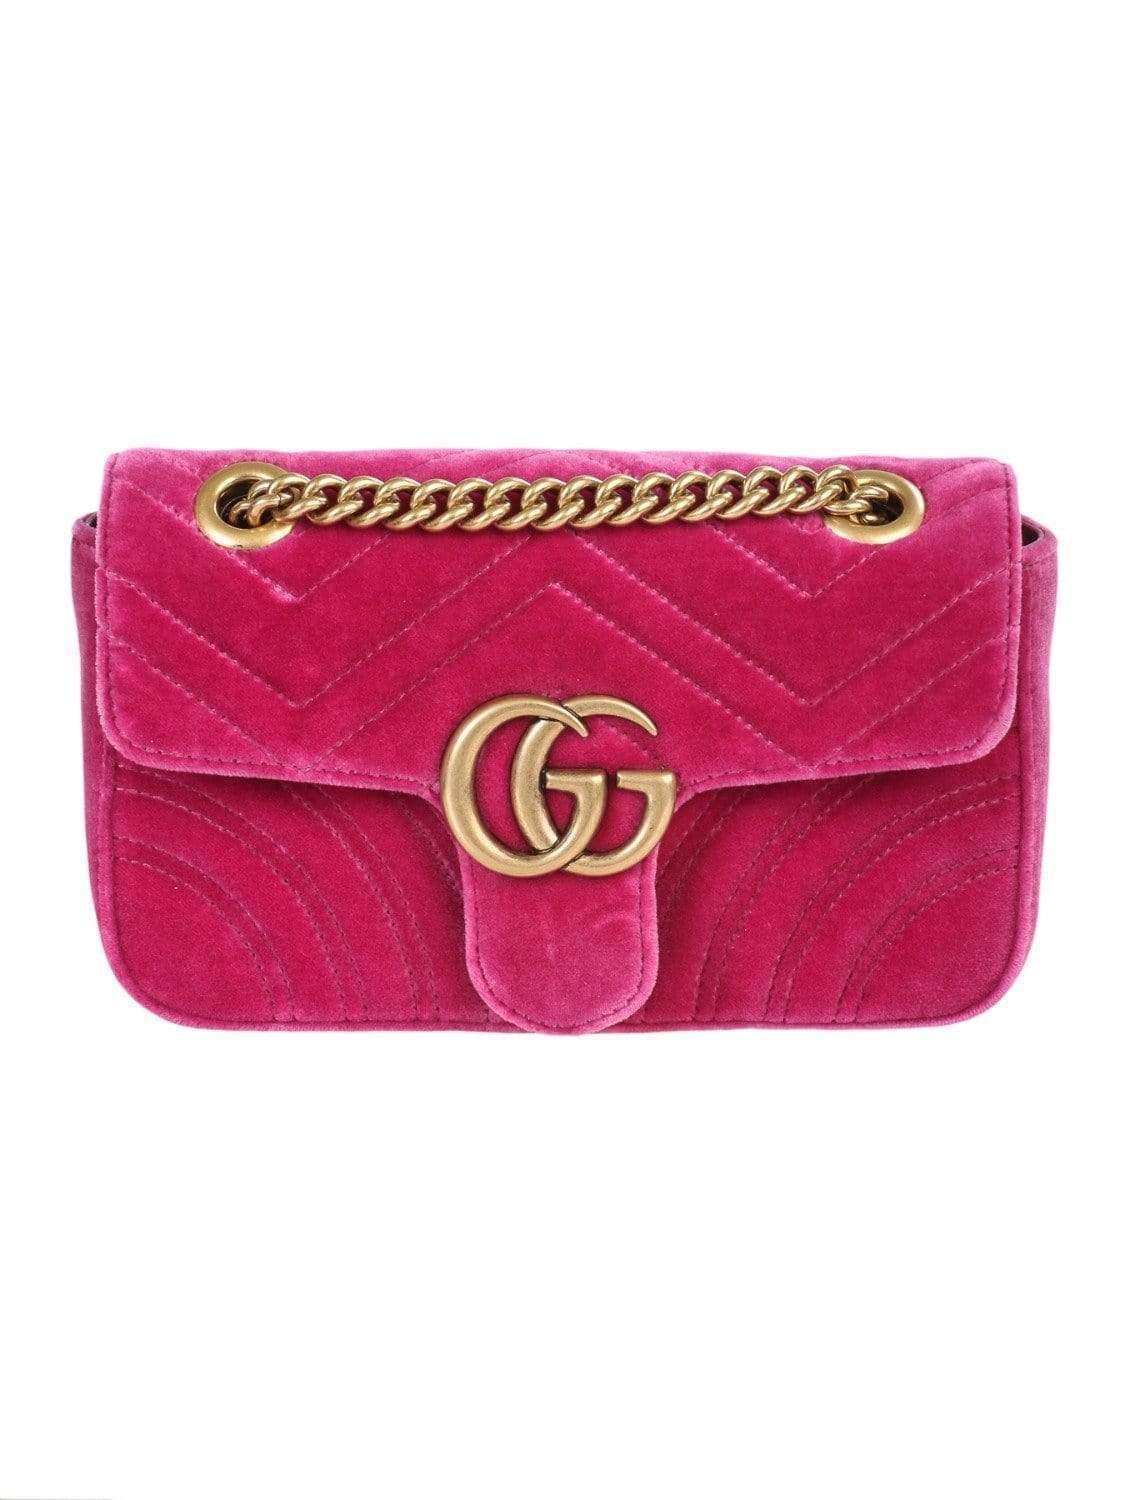 Gucci Marmont Mini Gg Bag In Pink Velvet With Chevron Pattern And Heart On  The Back - Lyst